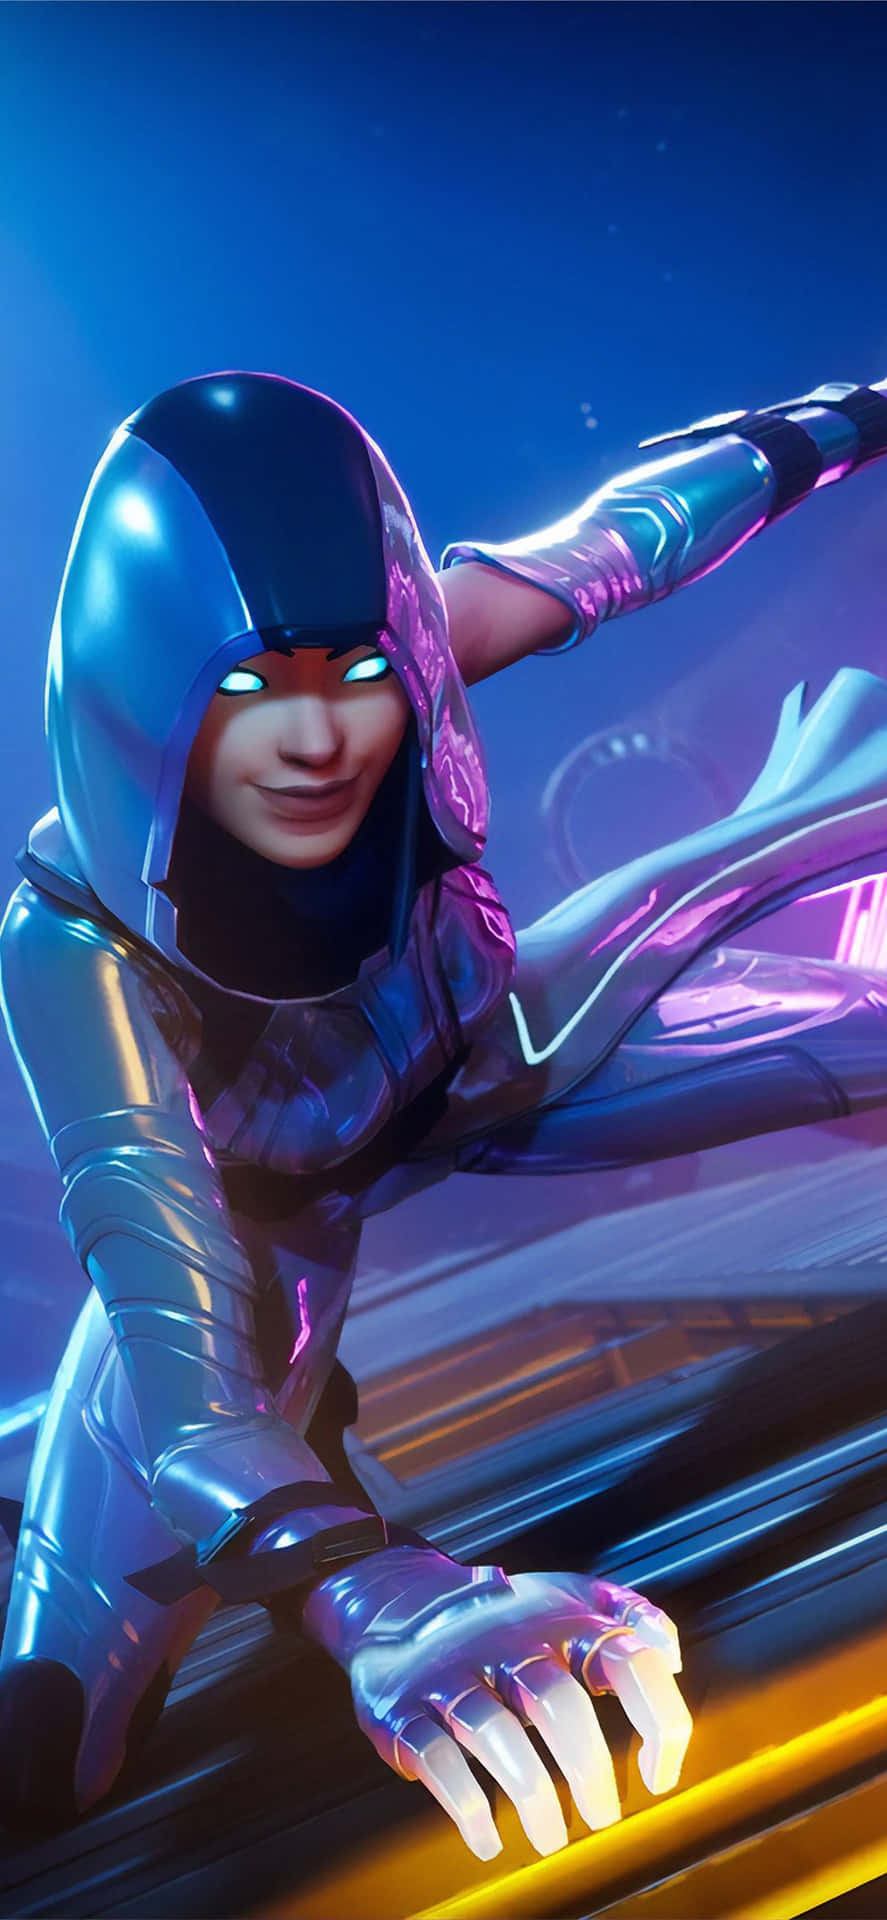 Show your strength and fearlessness in the game with the iconic Raven Fortnite skin. Wallpaper